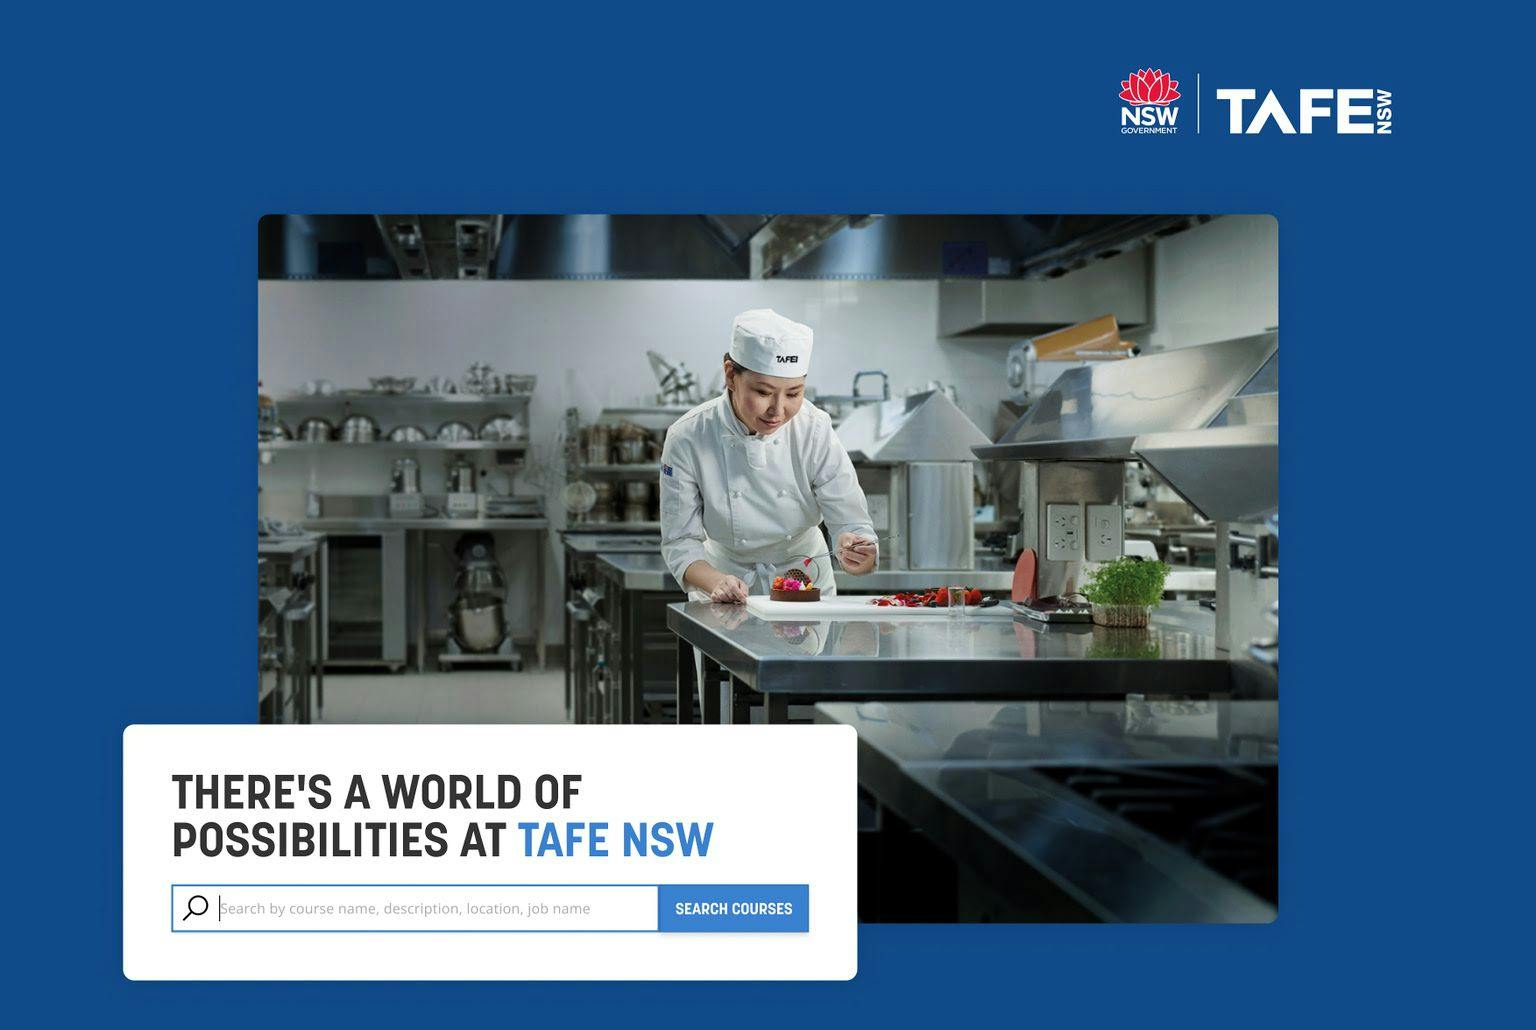 A stylised image of a cook in a commercial kitchen and a TAFE NSW search bar overlay. TAFE NSW logo in the top right.